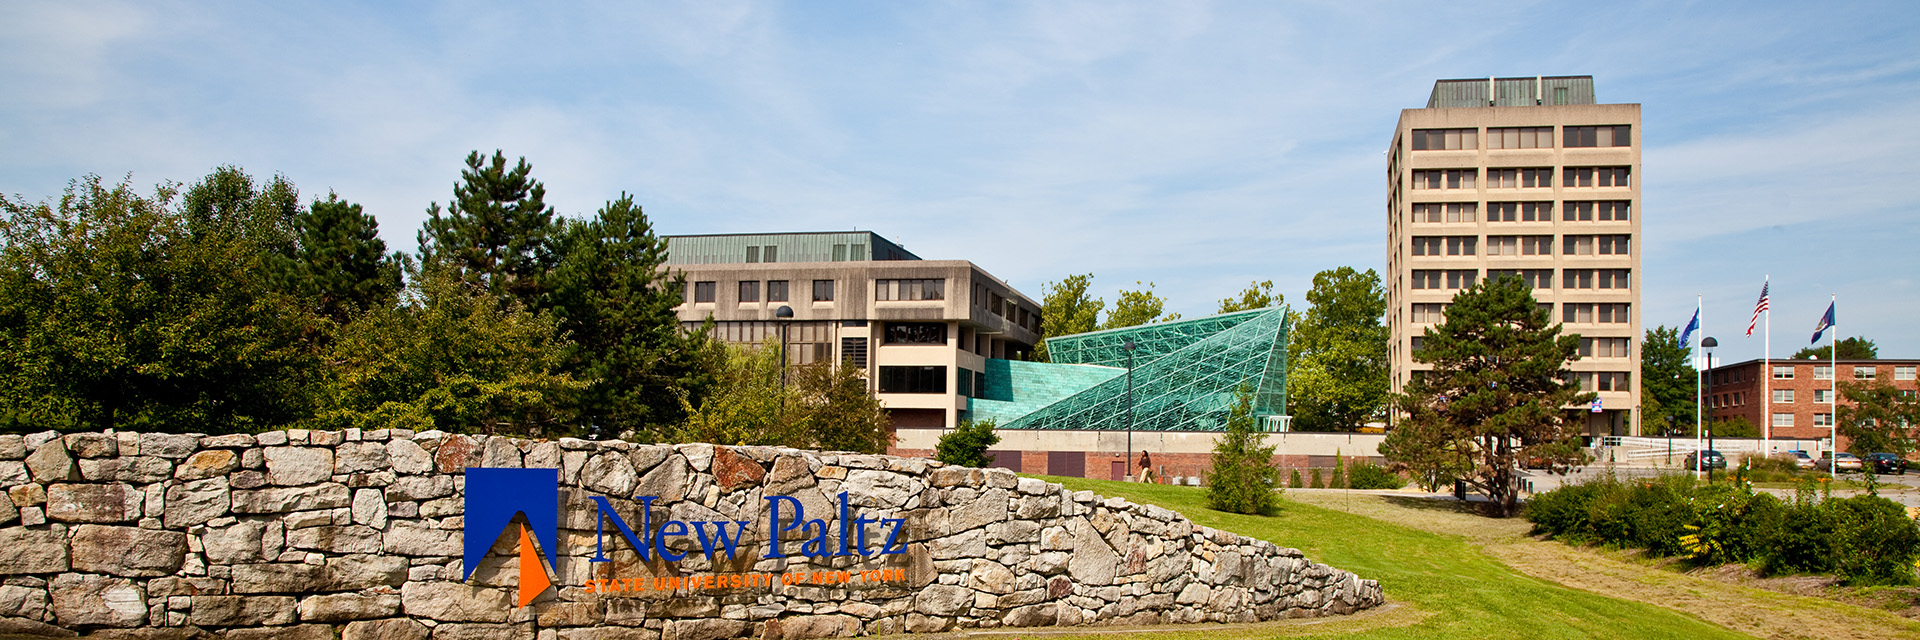 Suny New Paltz Academic Calendar 2022 Suny New Paltz | Office Of Human Resources, Diversity & Inclusion | Office  Of Human Resources, Diversity & Inclusion